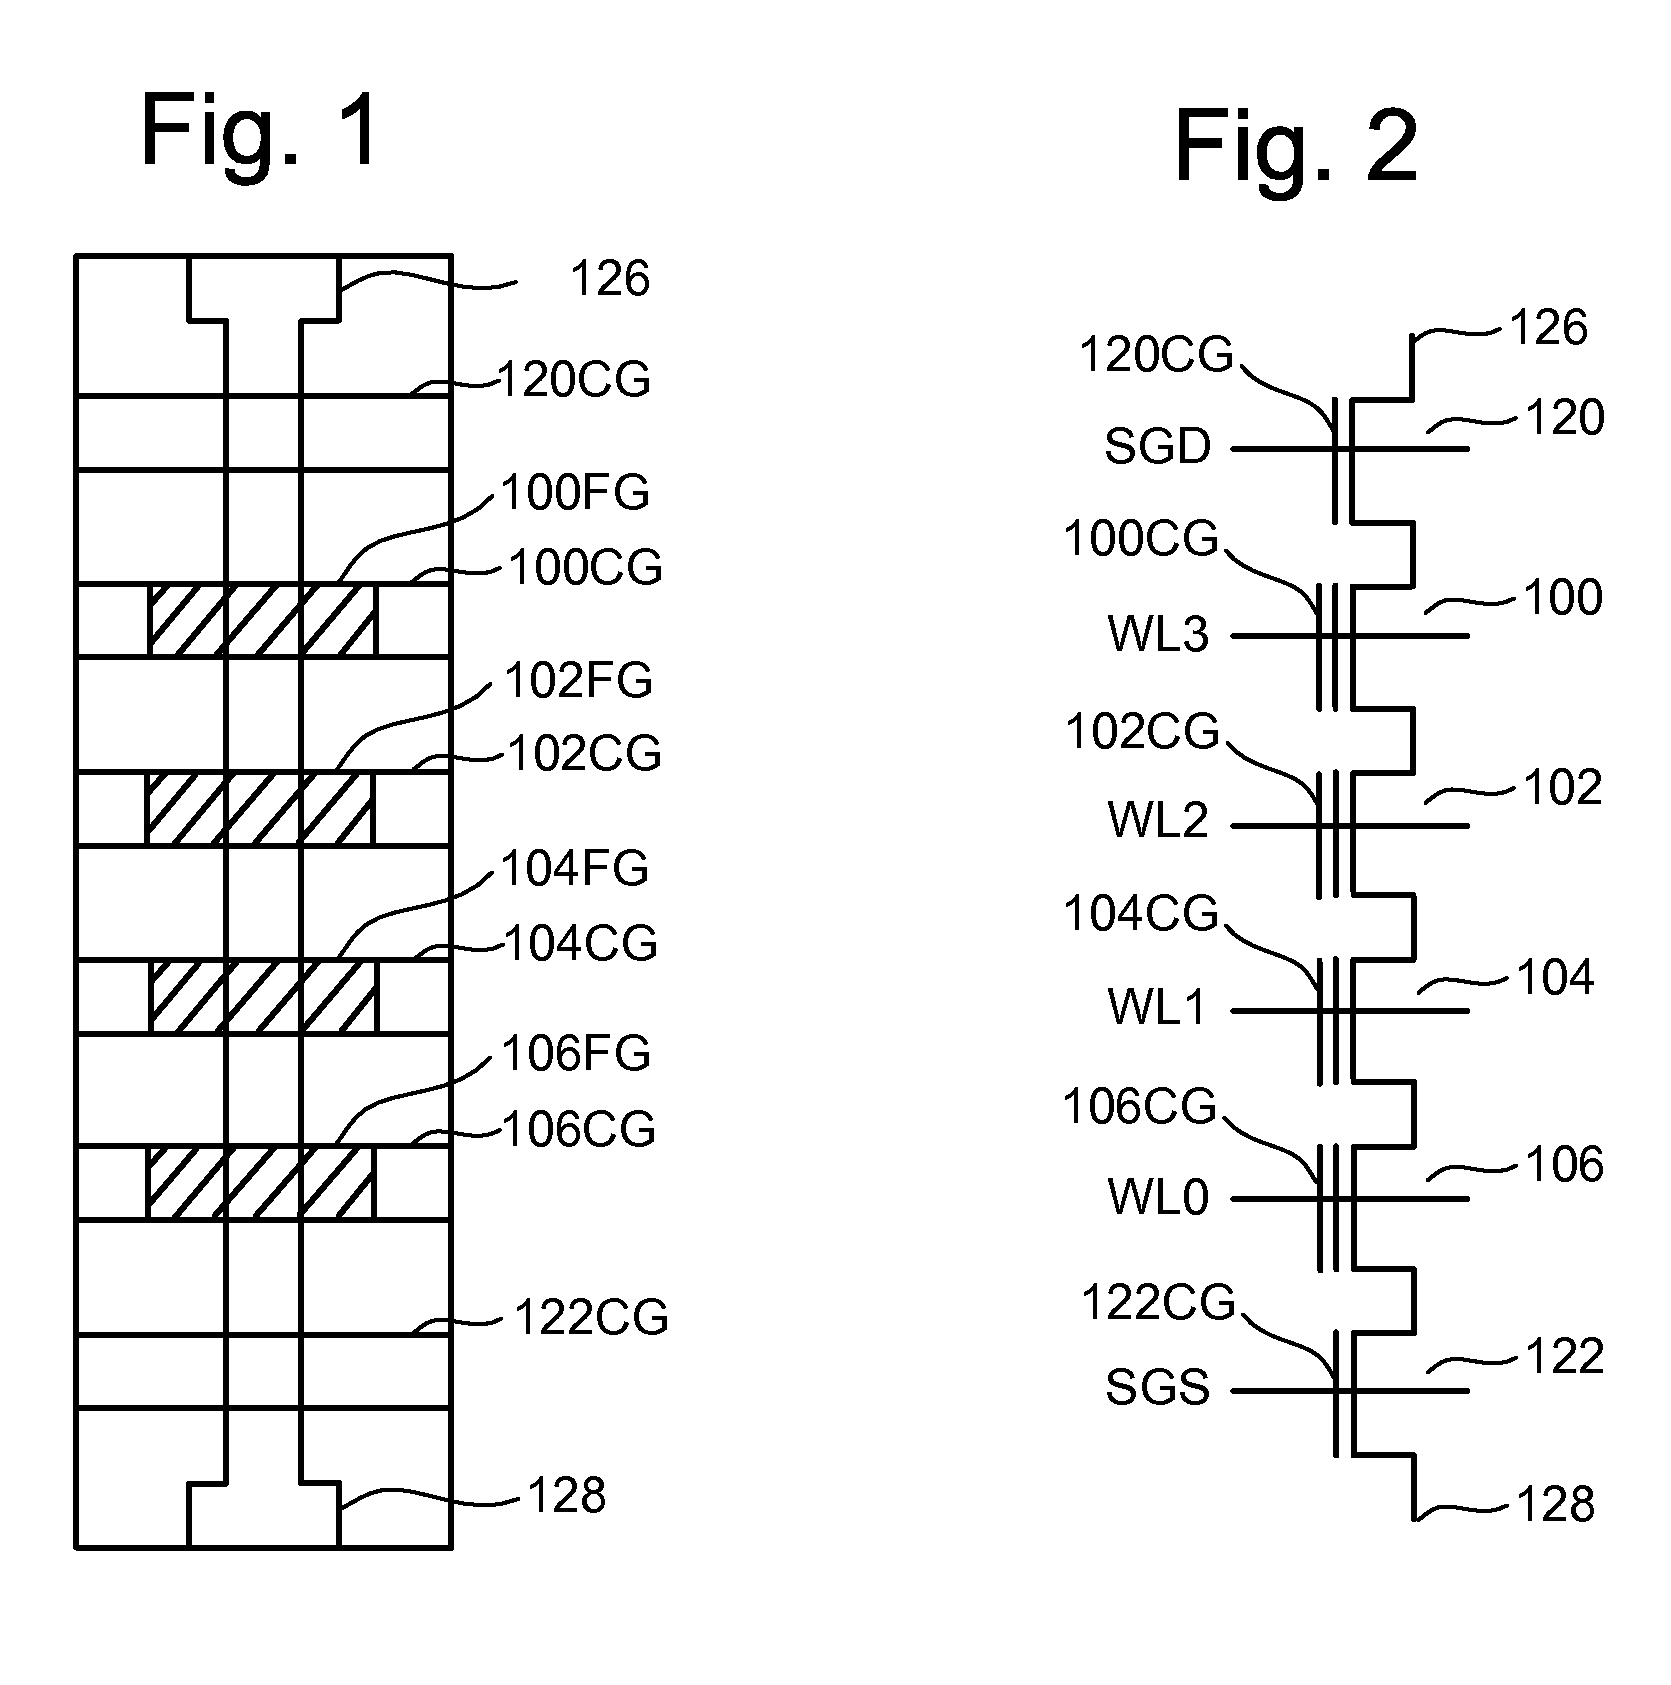 Systems For Erasing Non-Volatile Memory Using Individual Verification And Additional Erasing of Subsets of Memory Cells